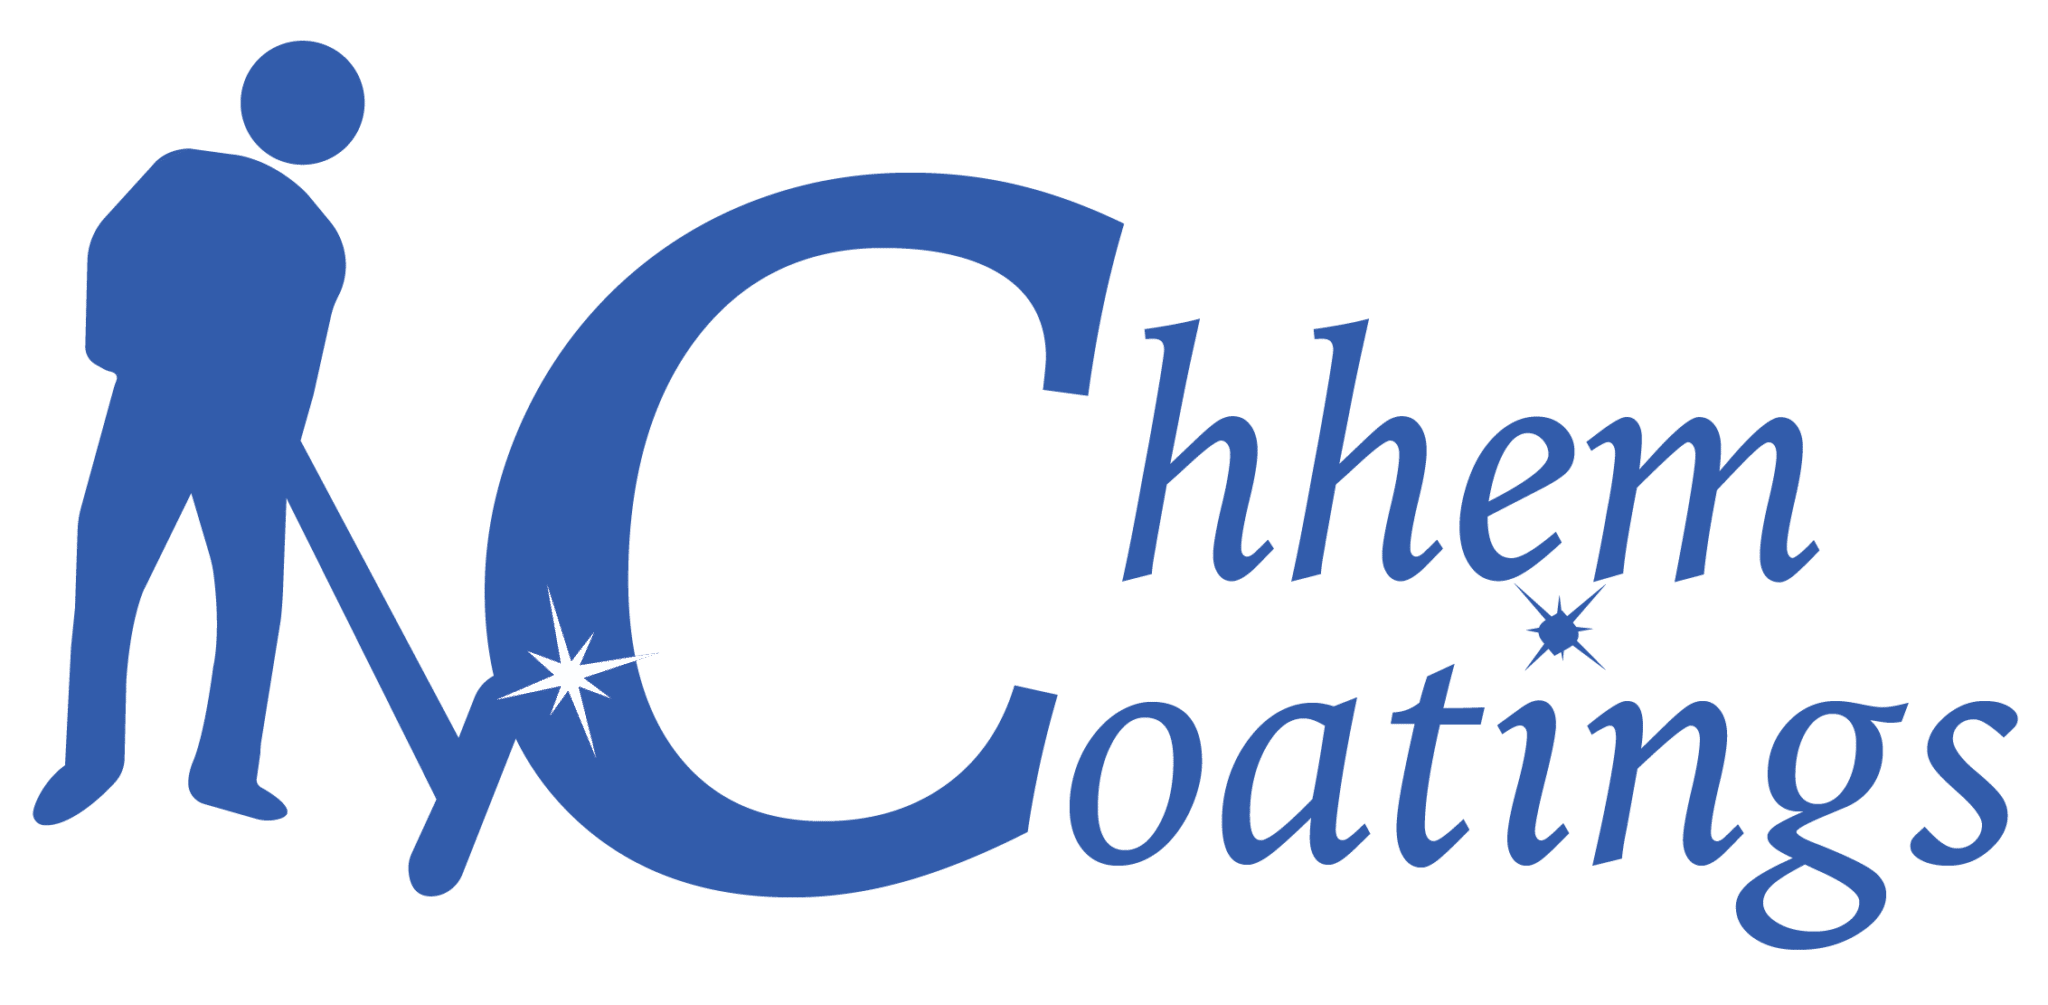 This image depicts a logo that includes a stylized silhouette of a person leaning on a capital letter 'C', which forms part of the words "Chem Coatings" in blue color against a black background, accented by two sparkling stars.